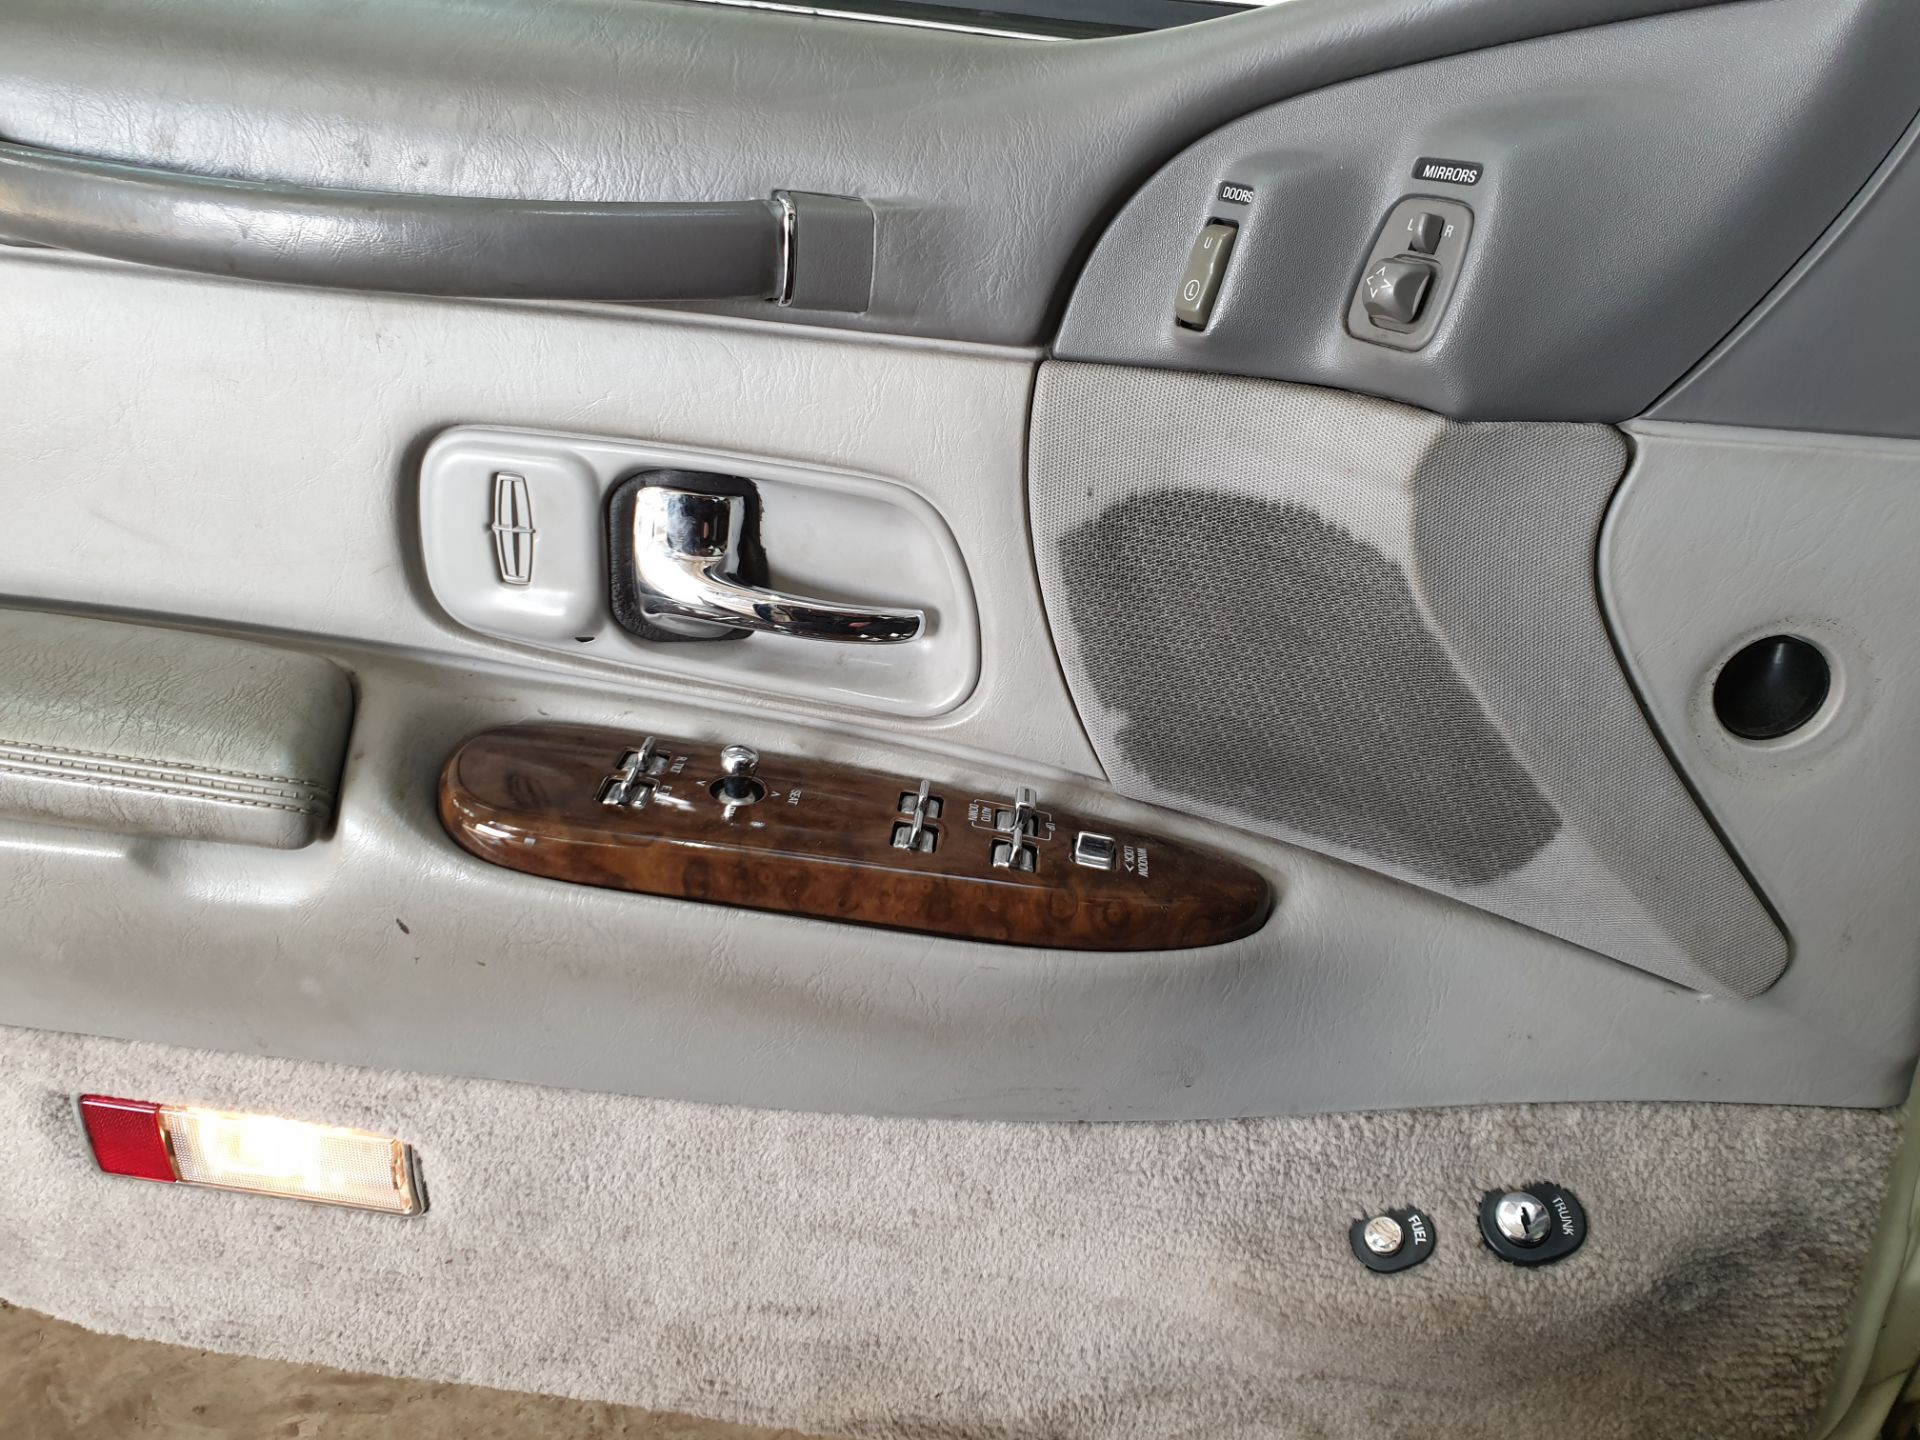 1999 Lincoln Town Car - Image 16 of 16